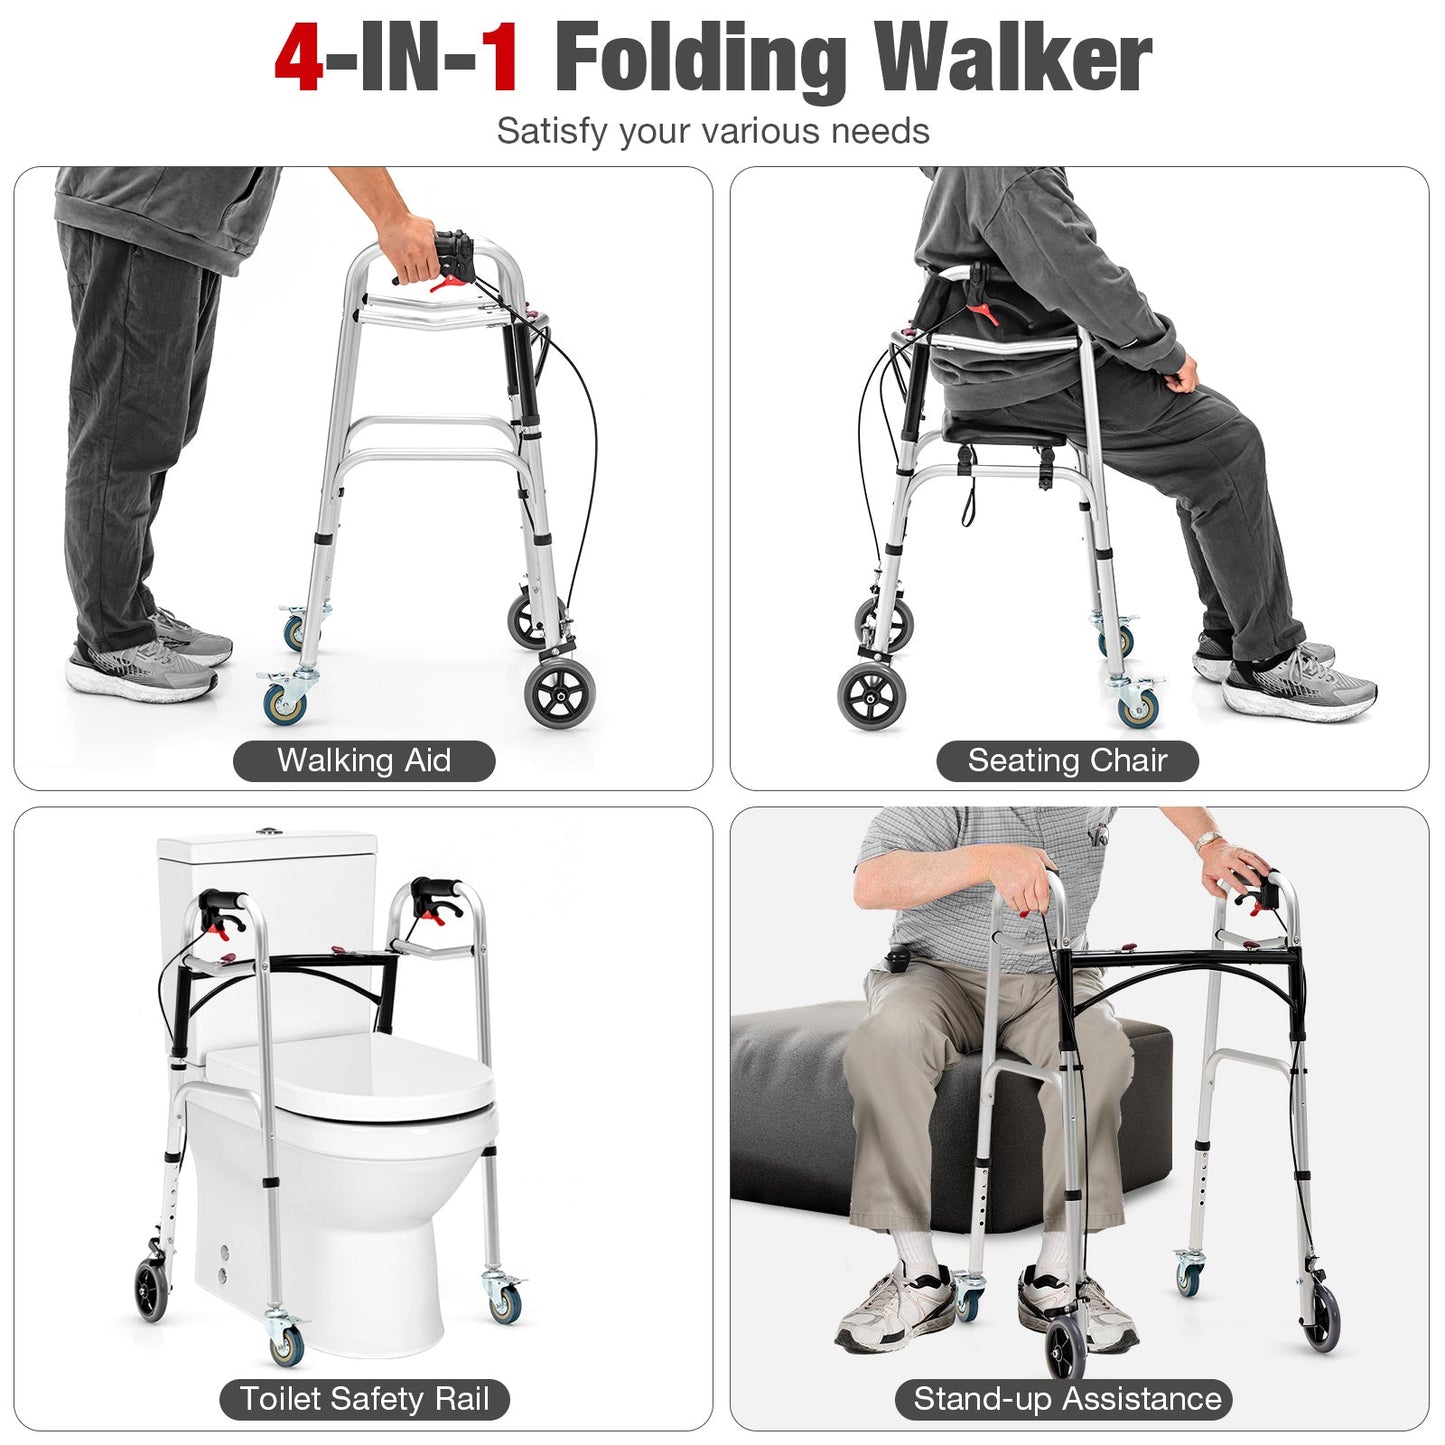 Height Adjustable Aluminum Walker with Rolling Wheels and Brakes at Gallery Canada